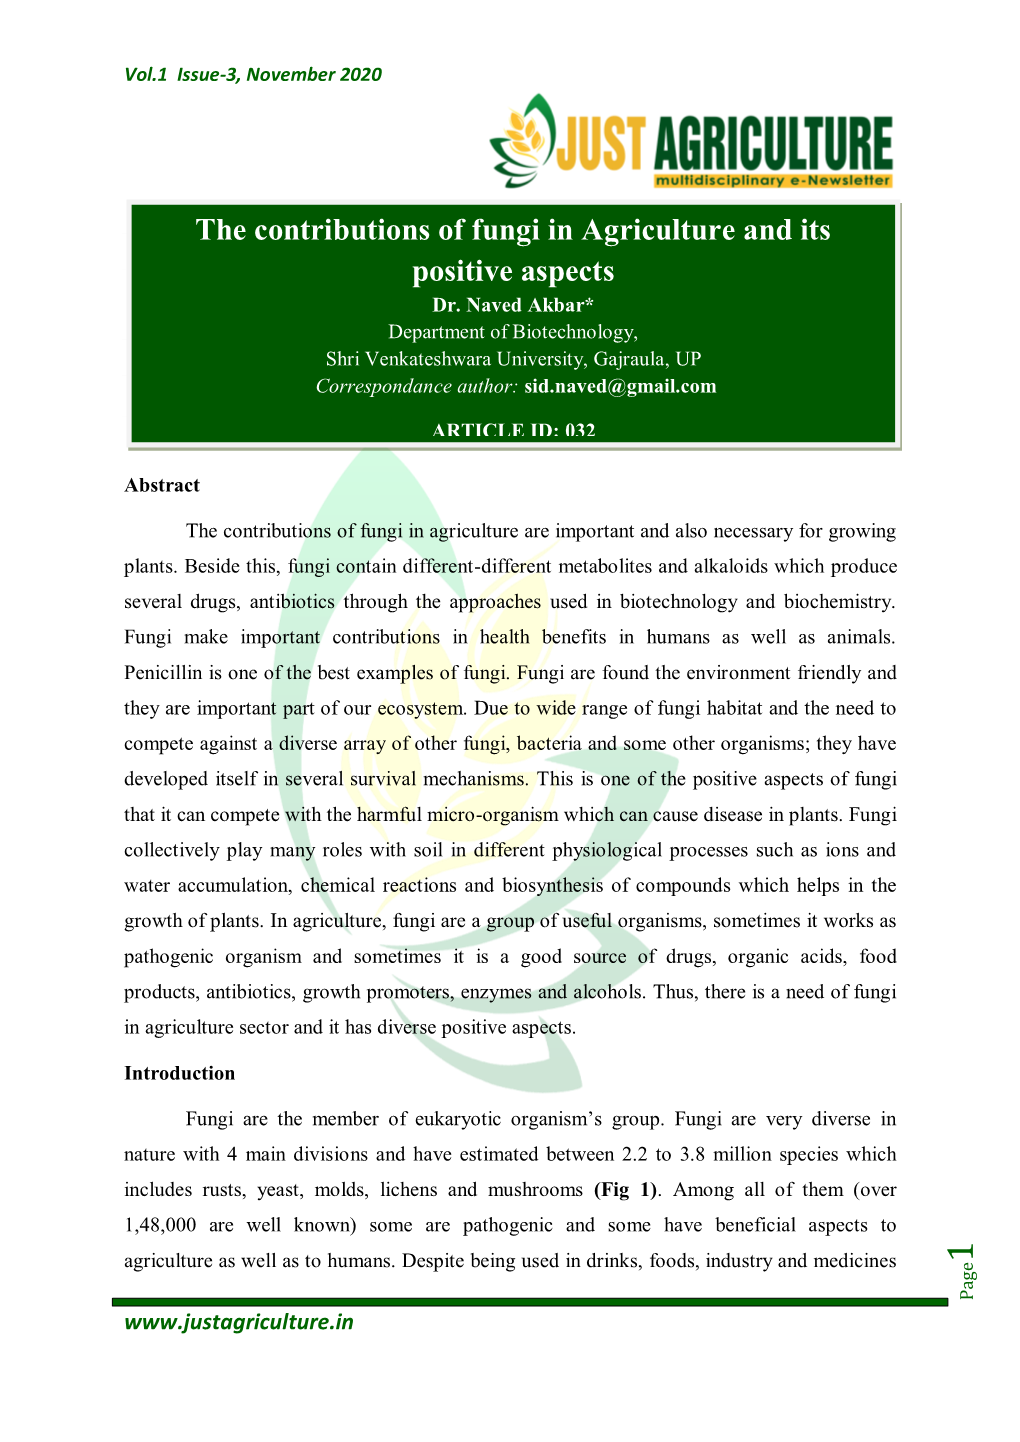 The Contributions of Fungi in Agriculture and Its Positive Aspects